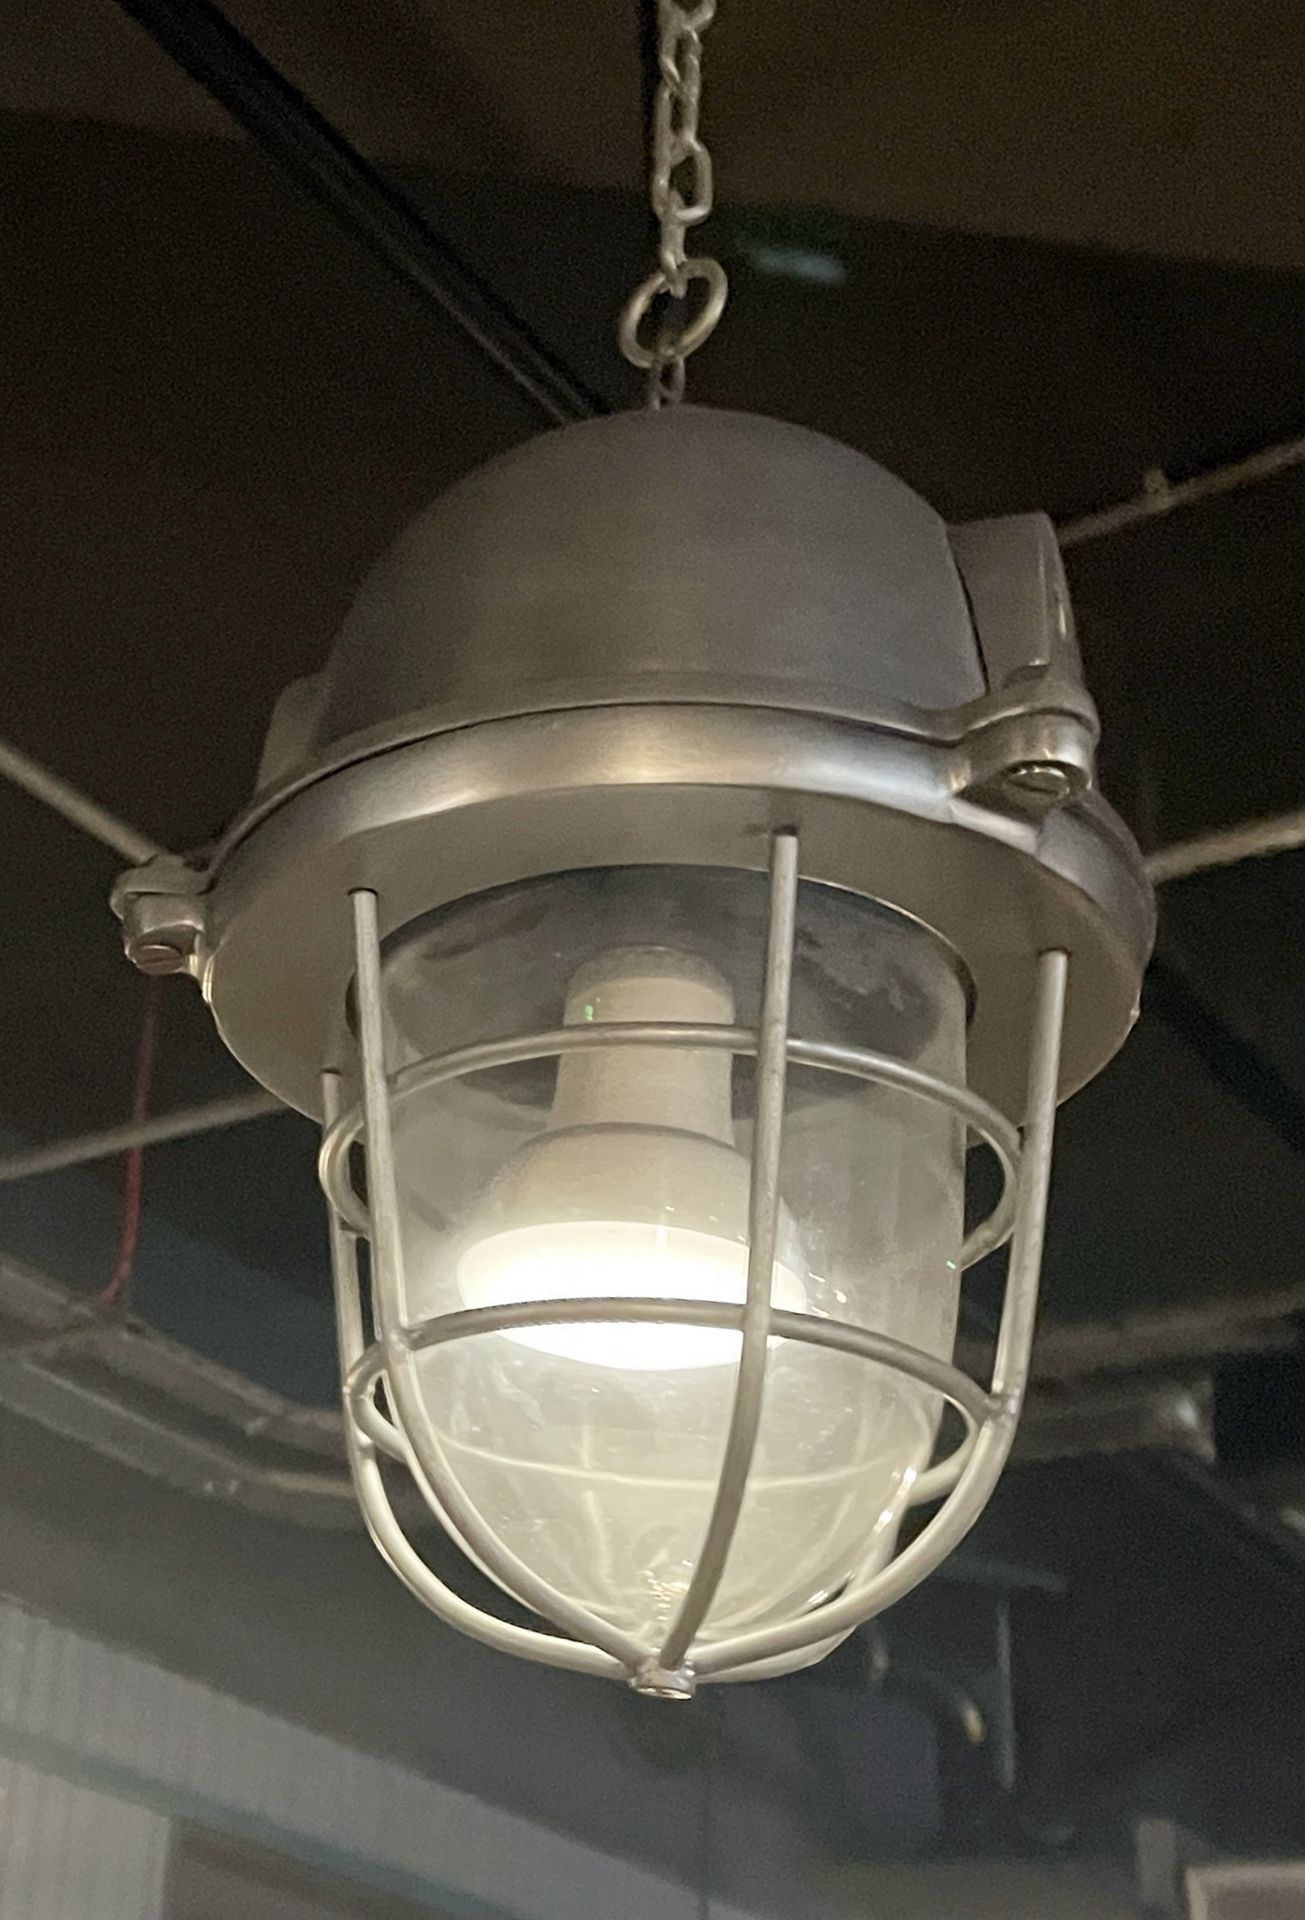 6 x Industrial Style Bulkhead Ceiling Light Pendants - Size: 30 x 120 cms - Suspended Size Unknown